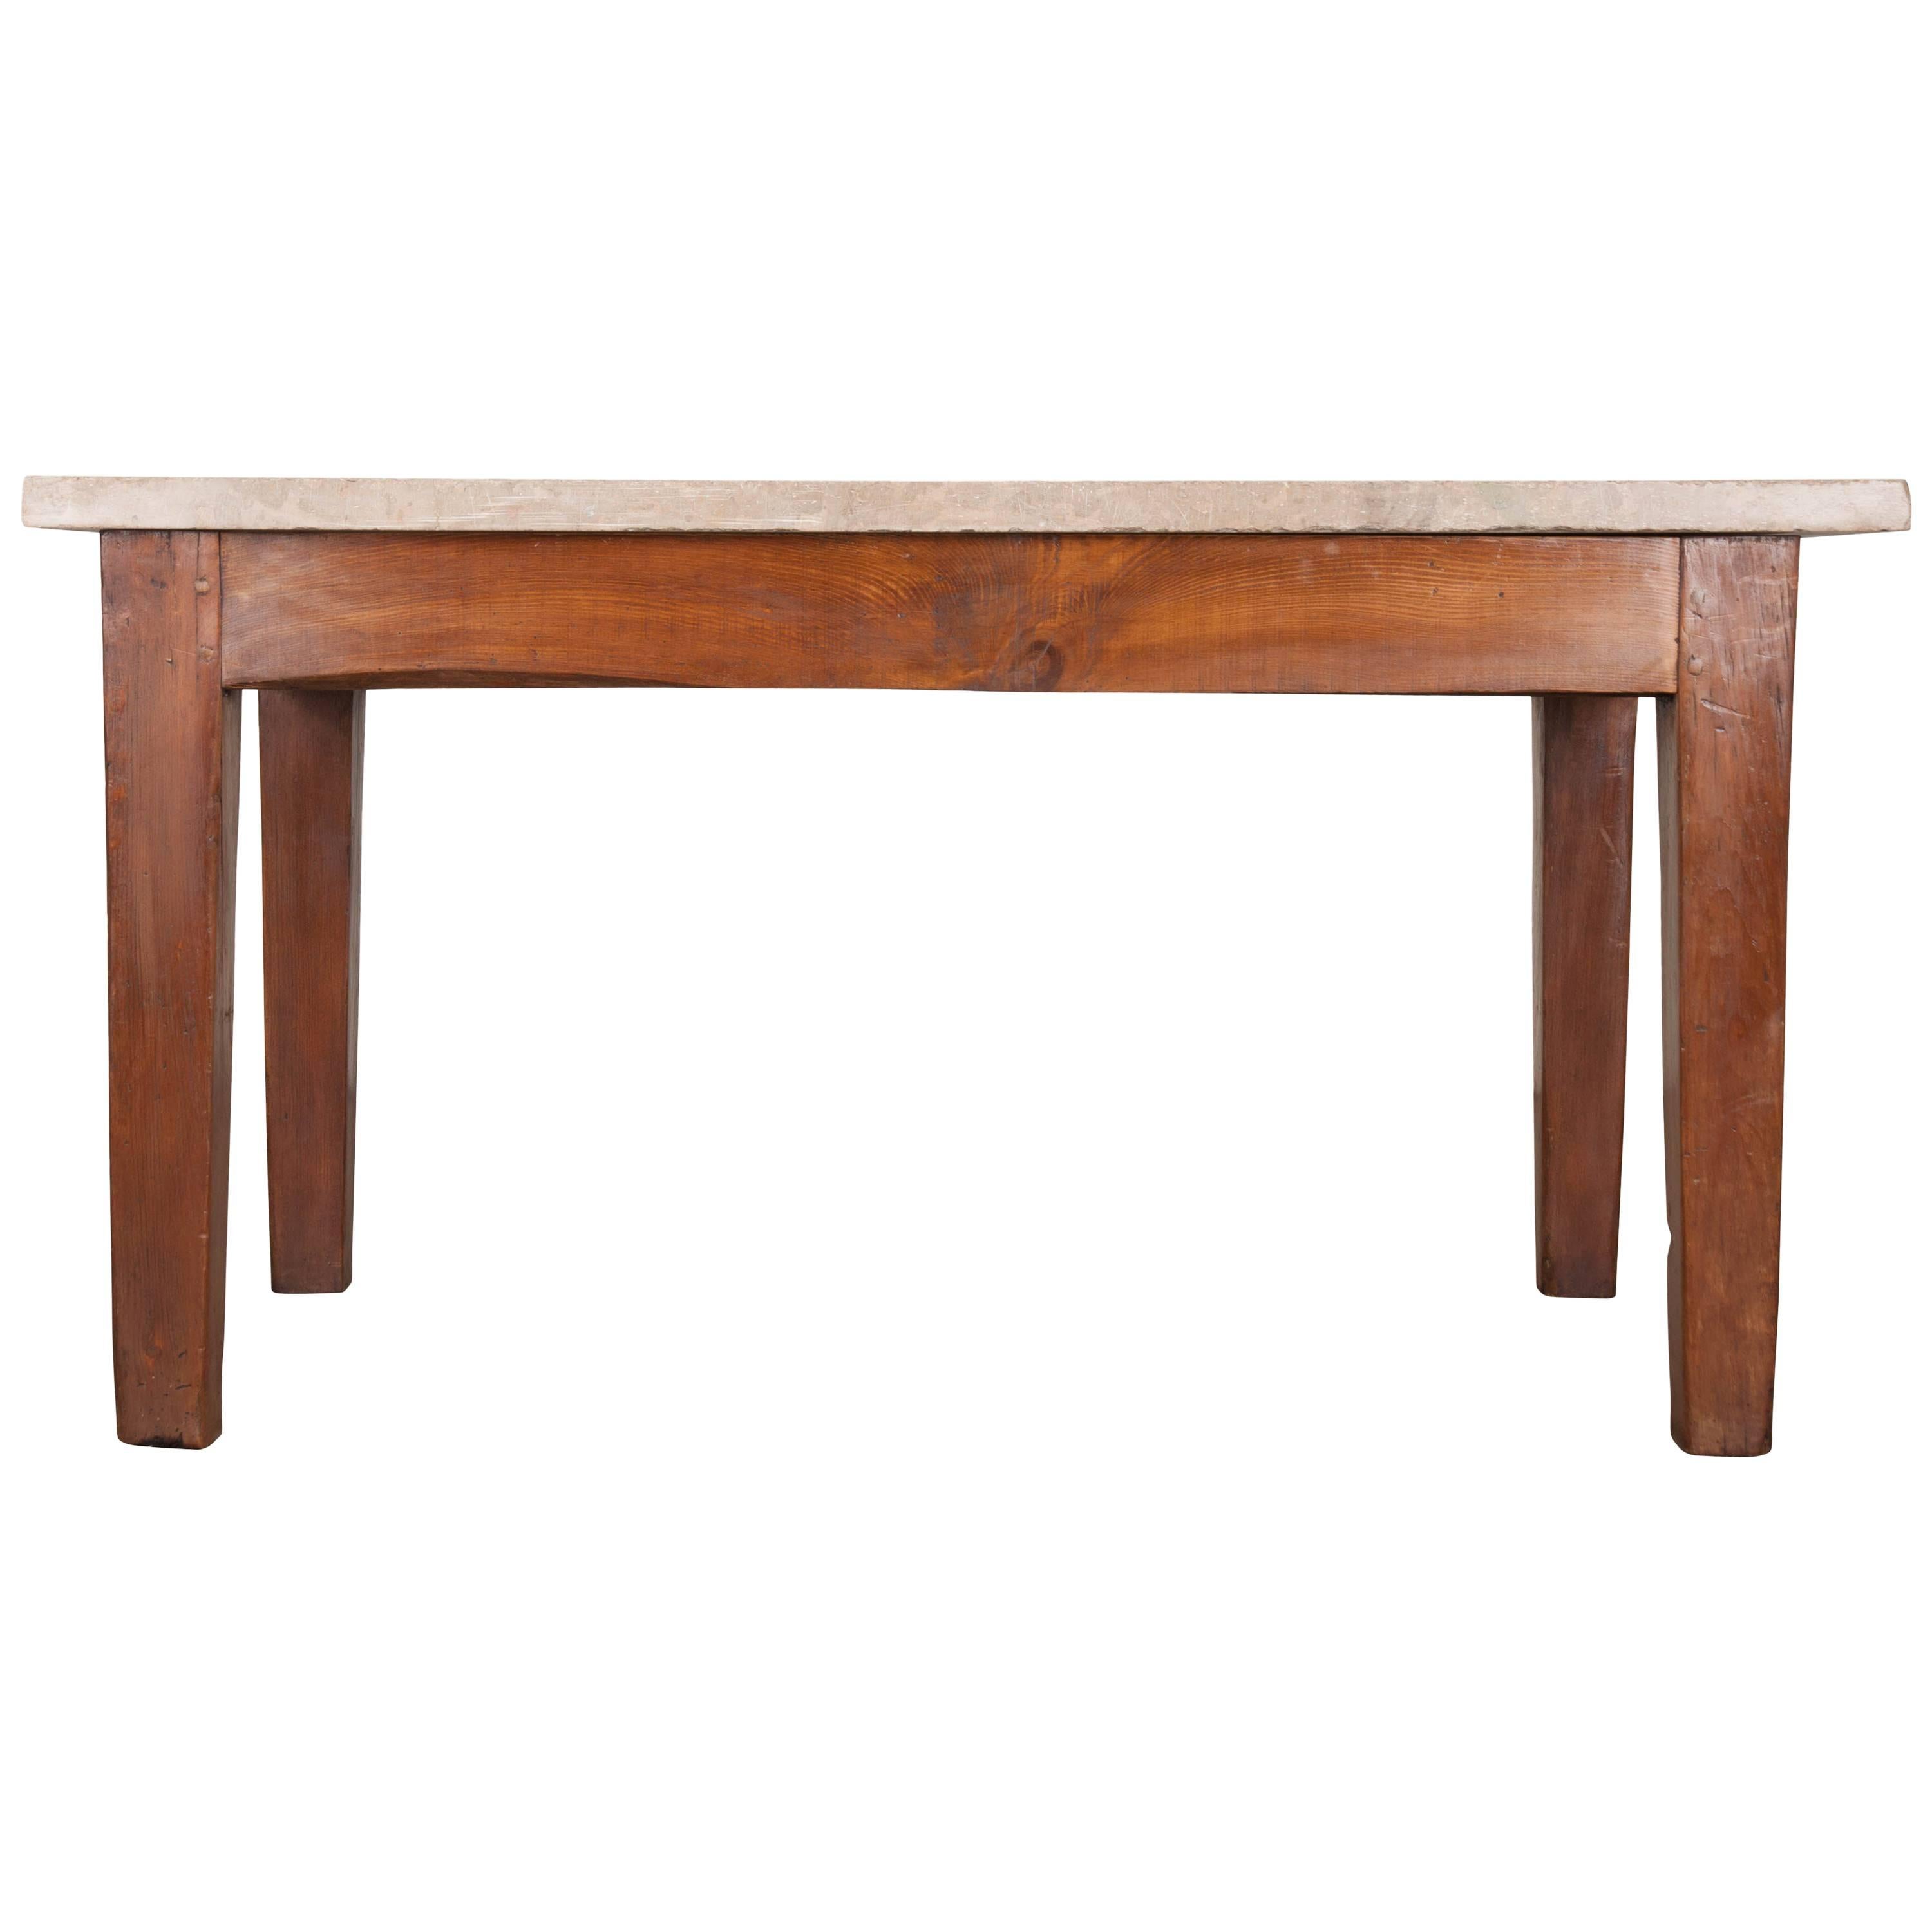 French 19th Century Pine Table with Thick Stone Top